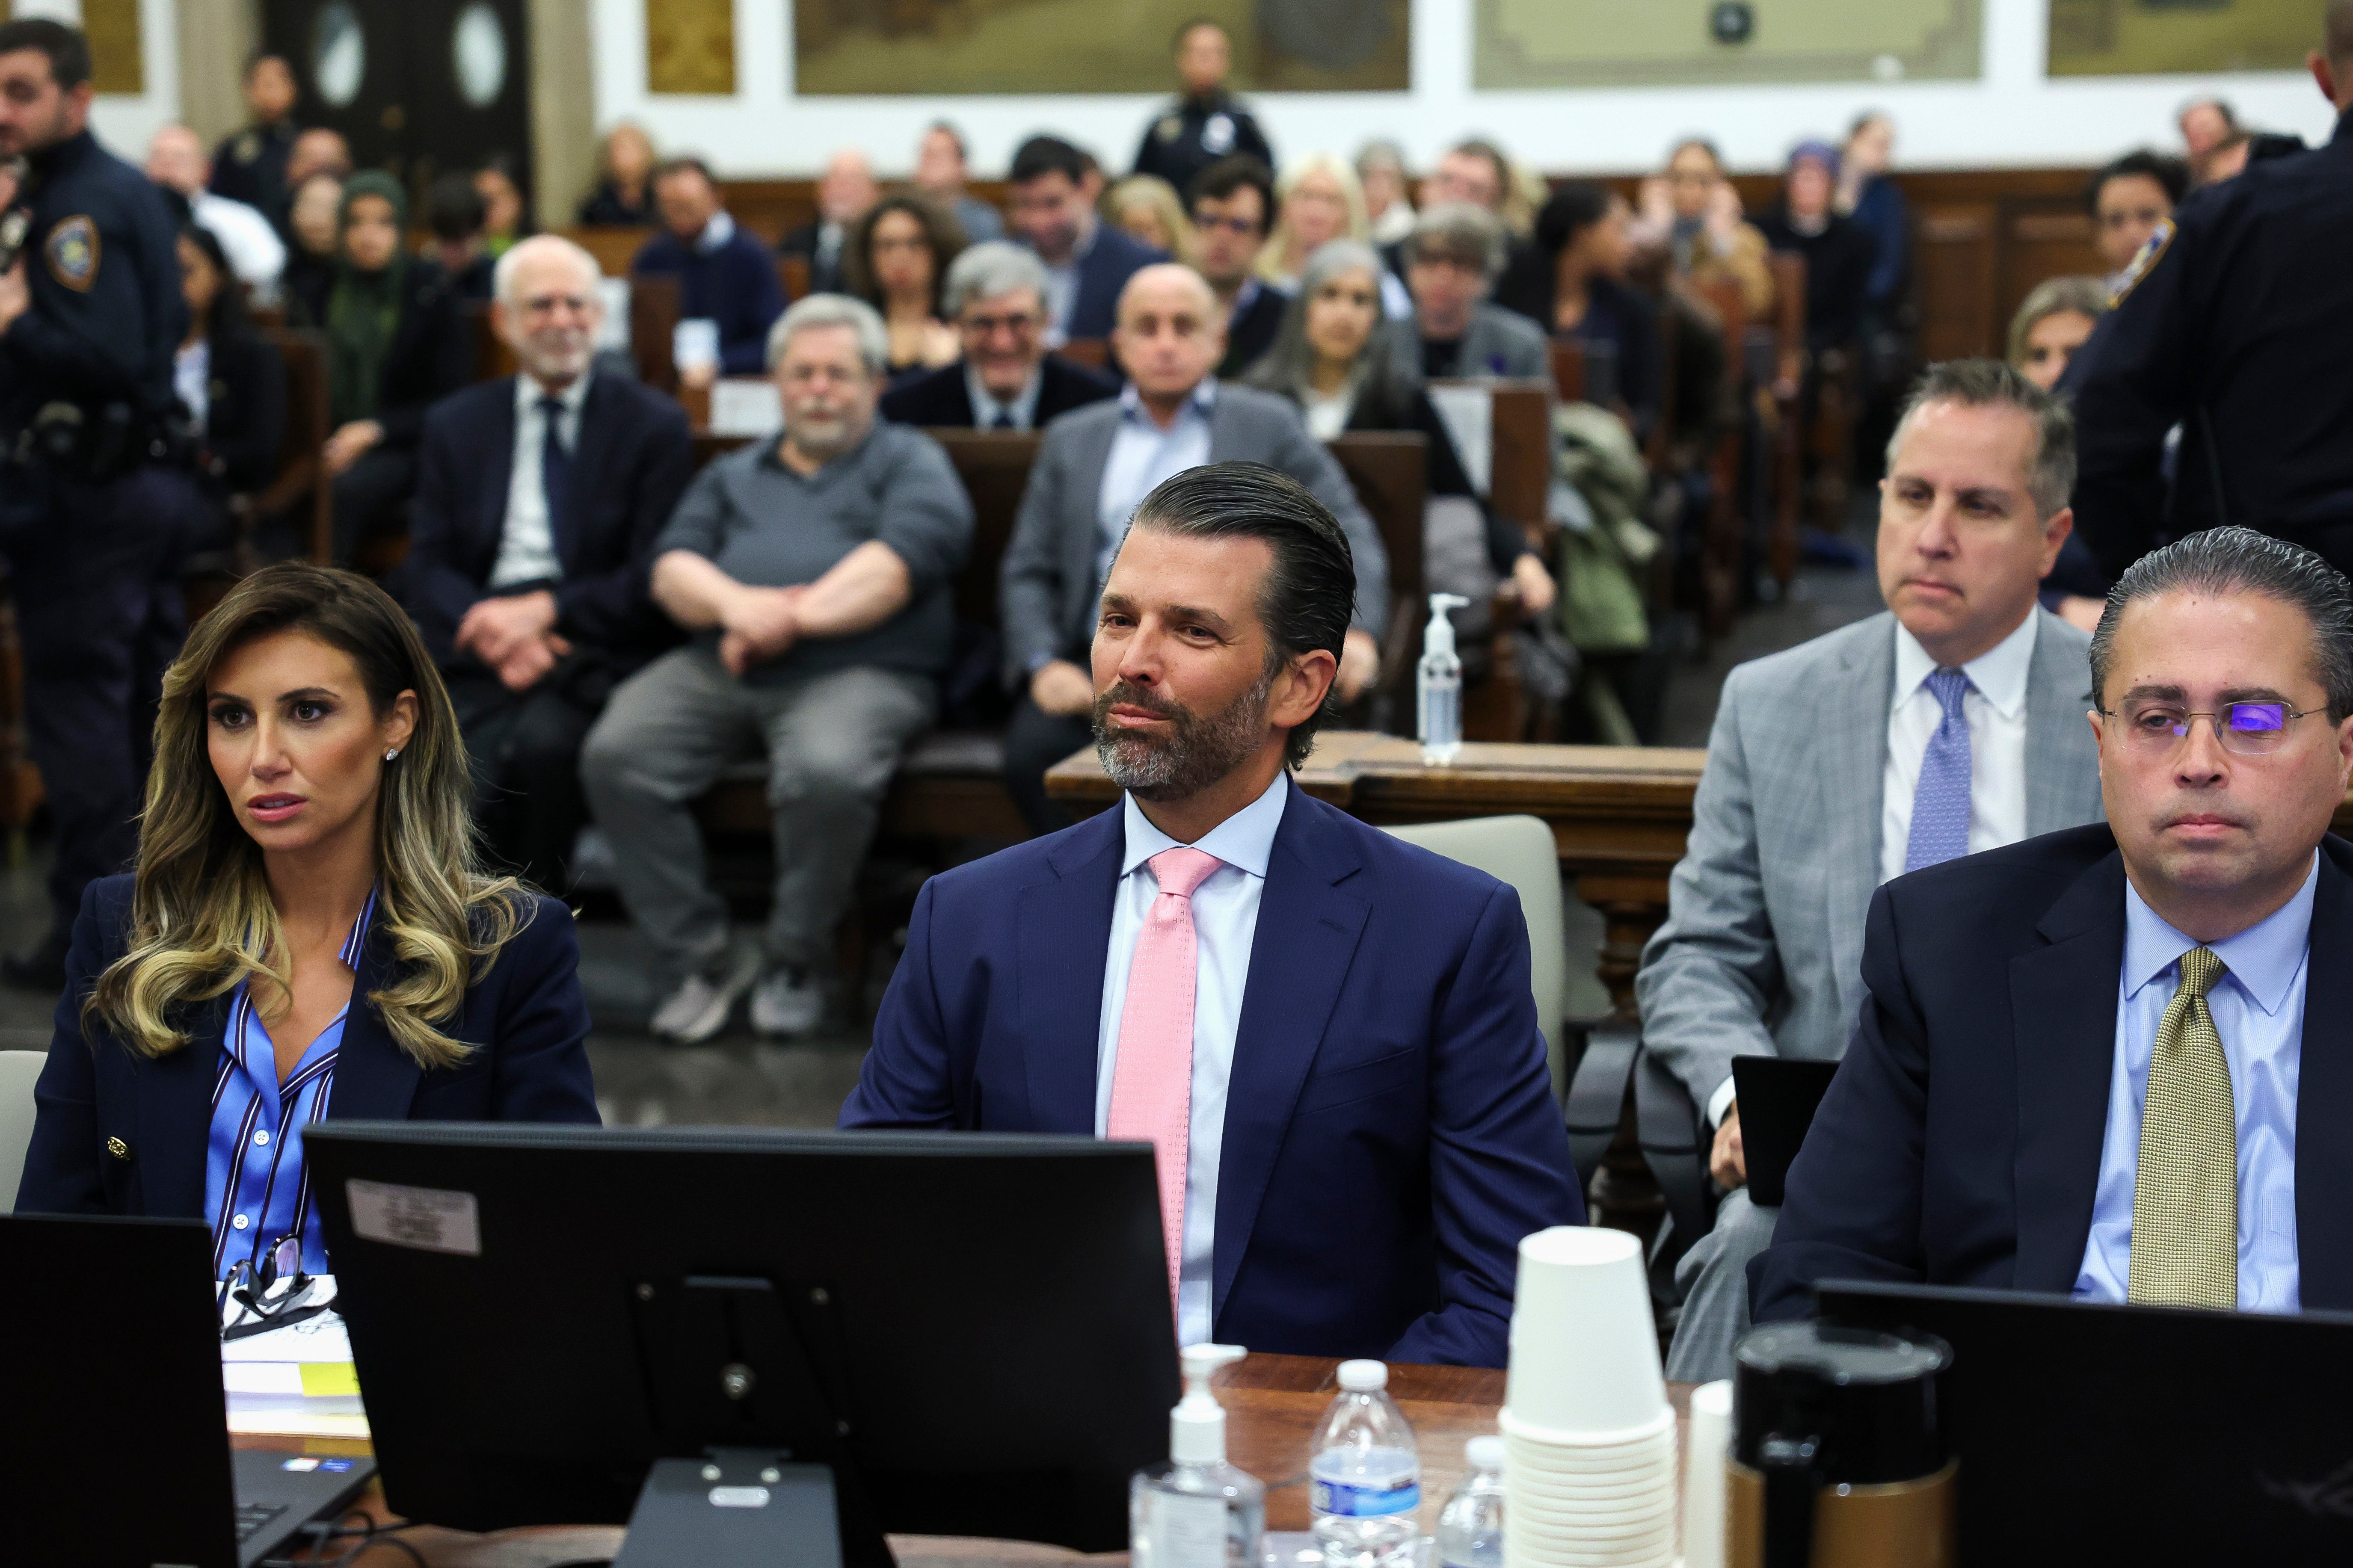 Donald Trump Jr on 1 November in the courtroom